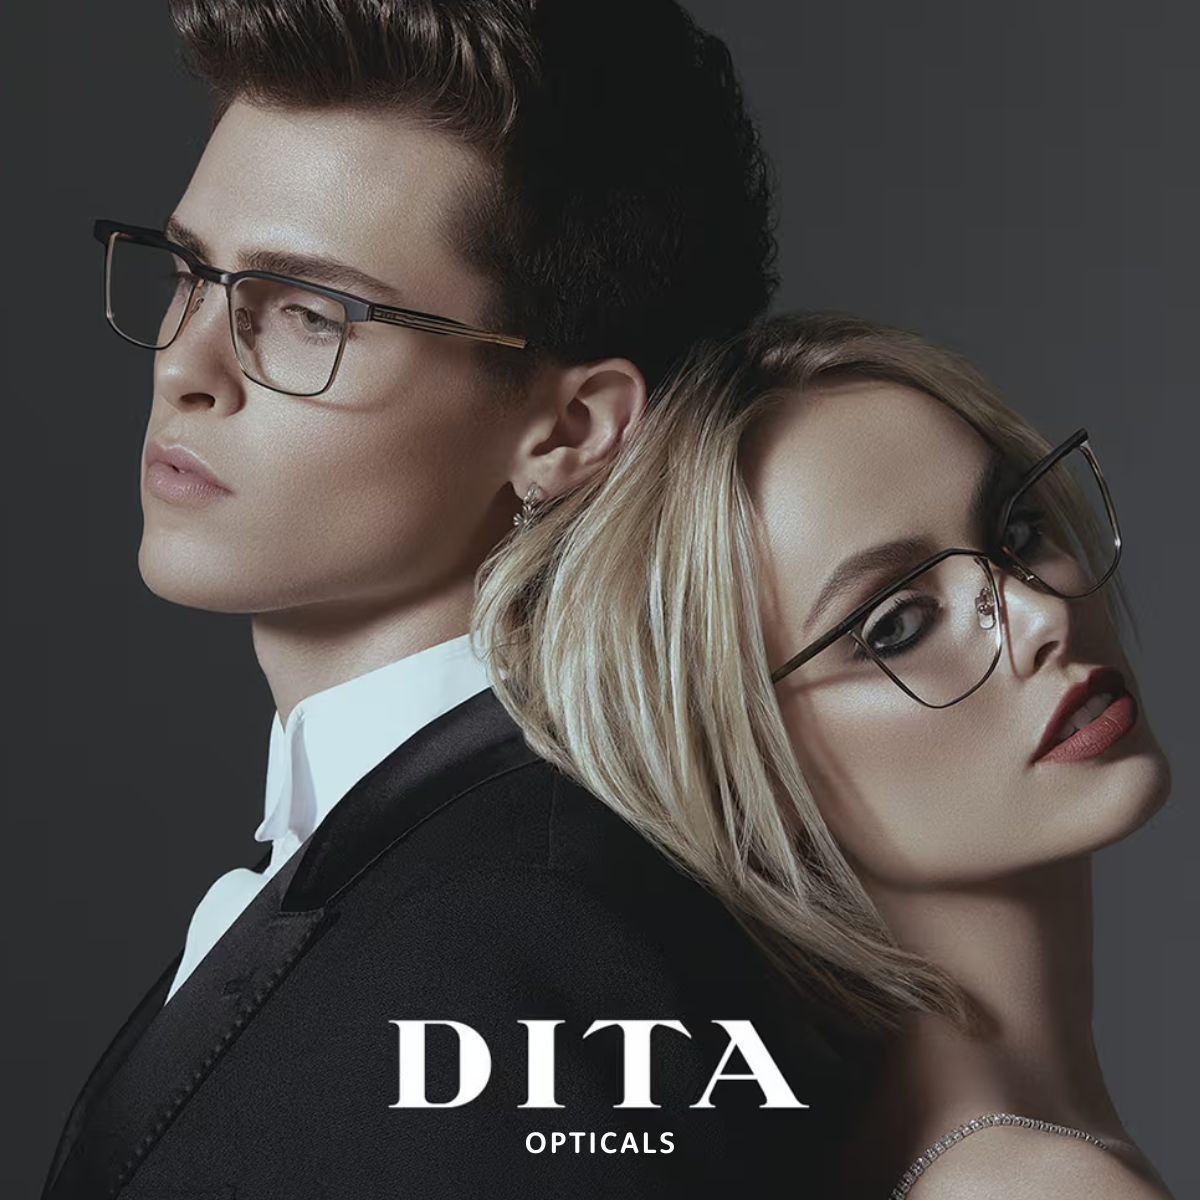 "Latest collection of Dita Eyewear frames and optical glasses for men and women, available exclusively at Optorium for affordable luxury."